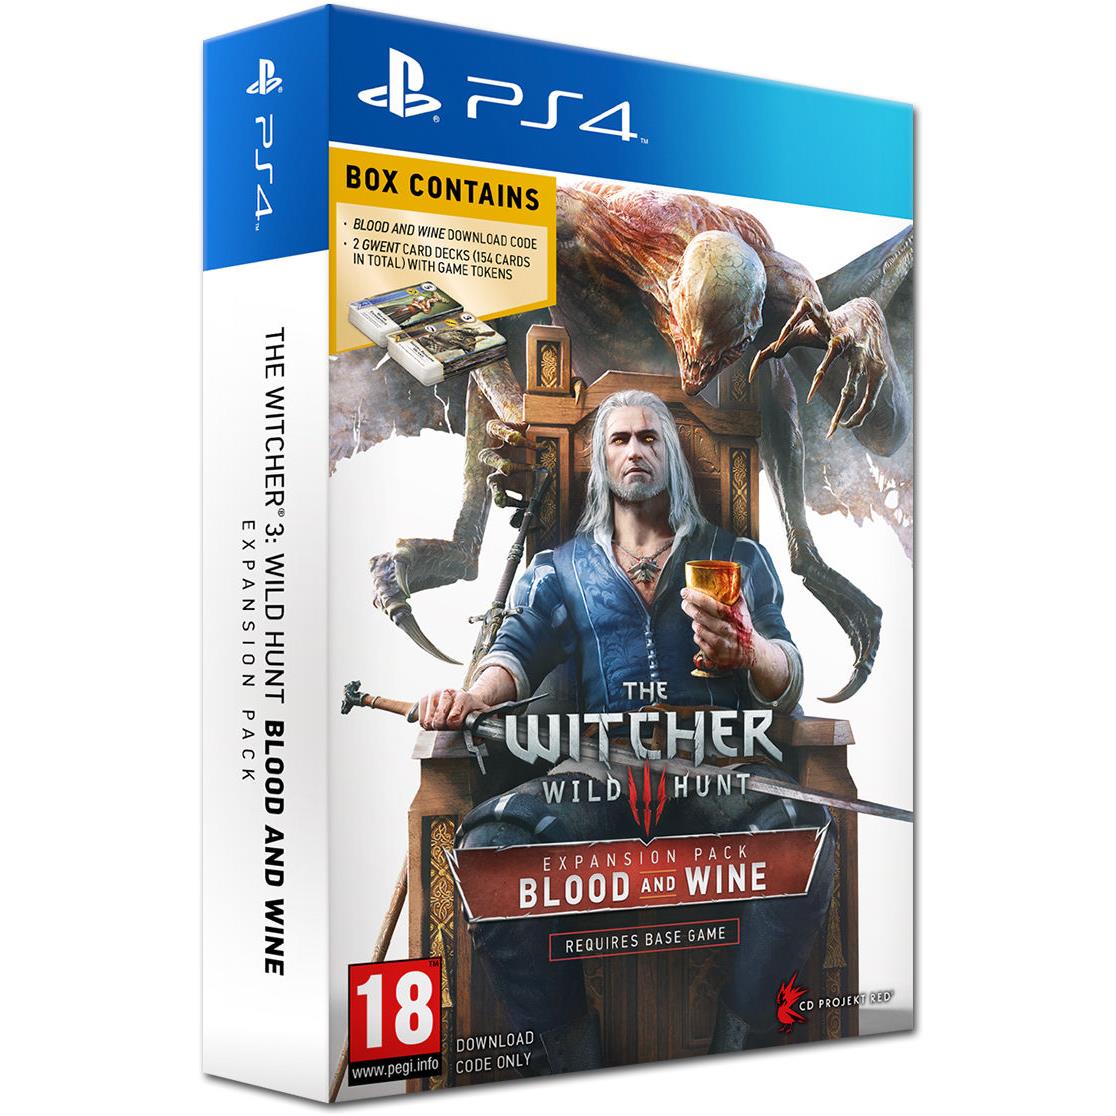 dia-game-ps4-the-witcher-3-wild-hunt-blood-and-wine